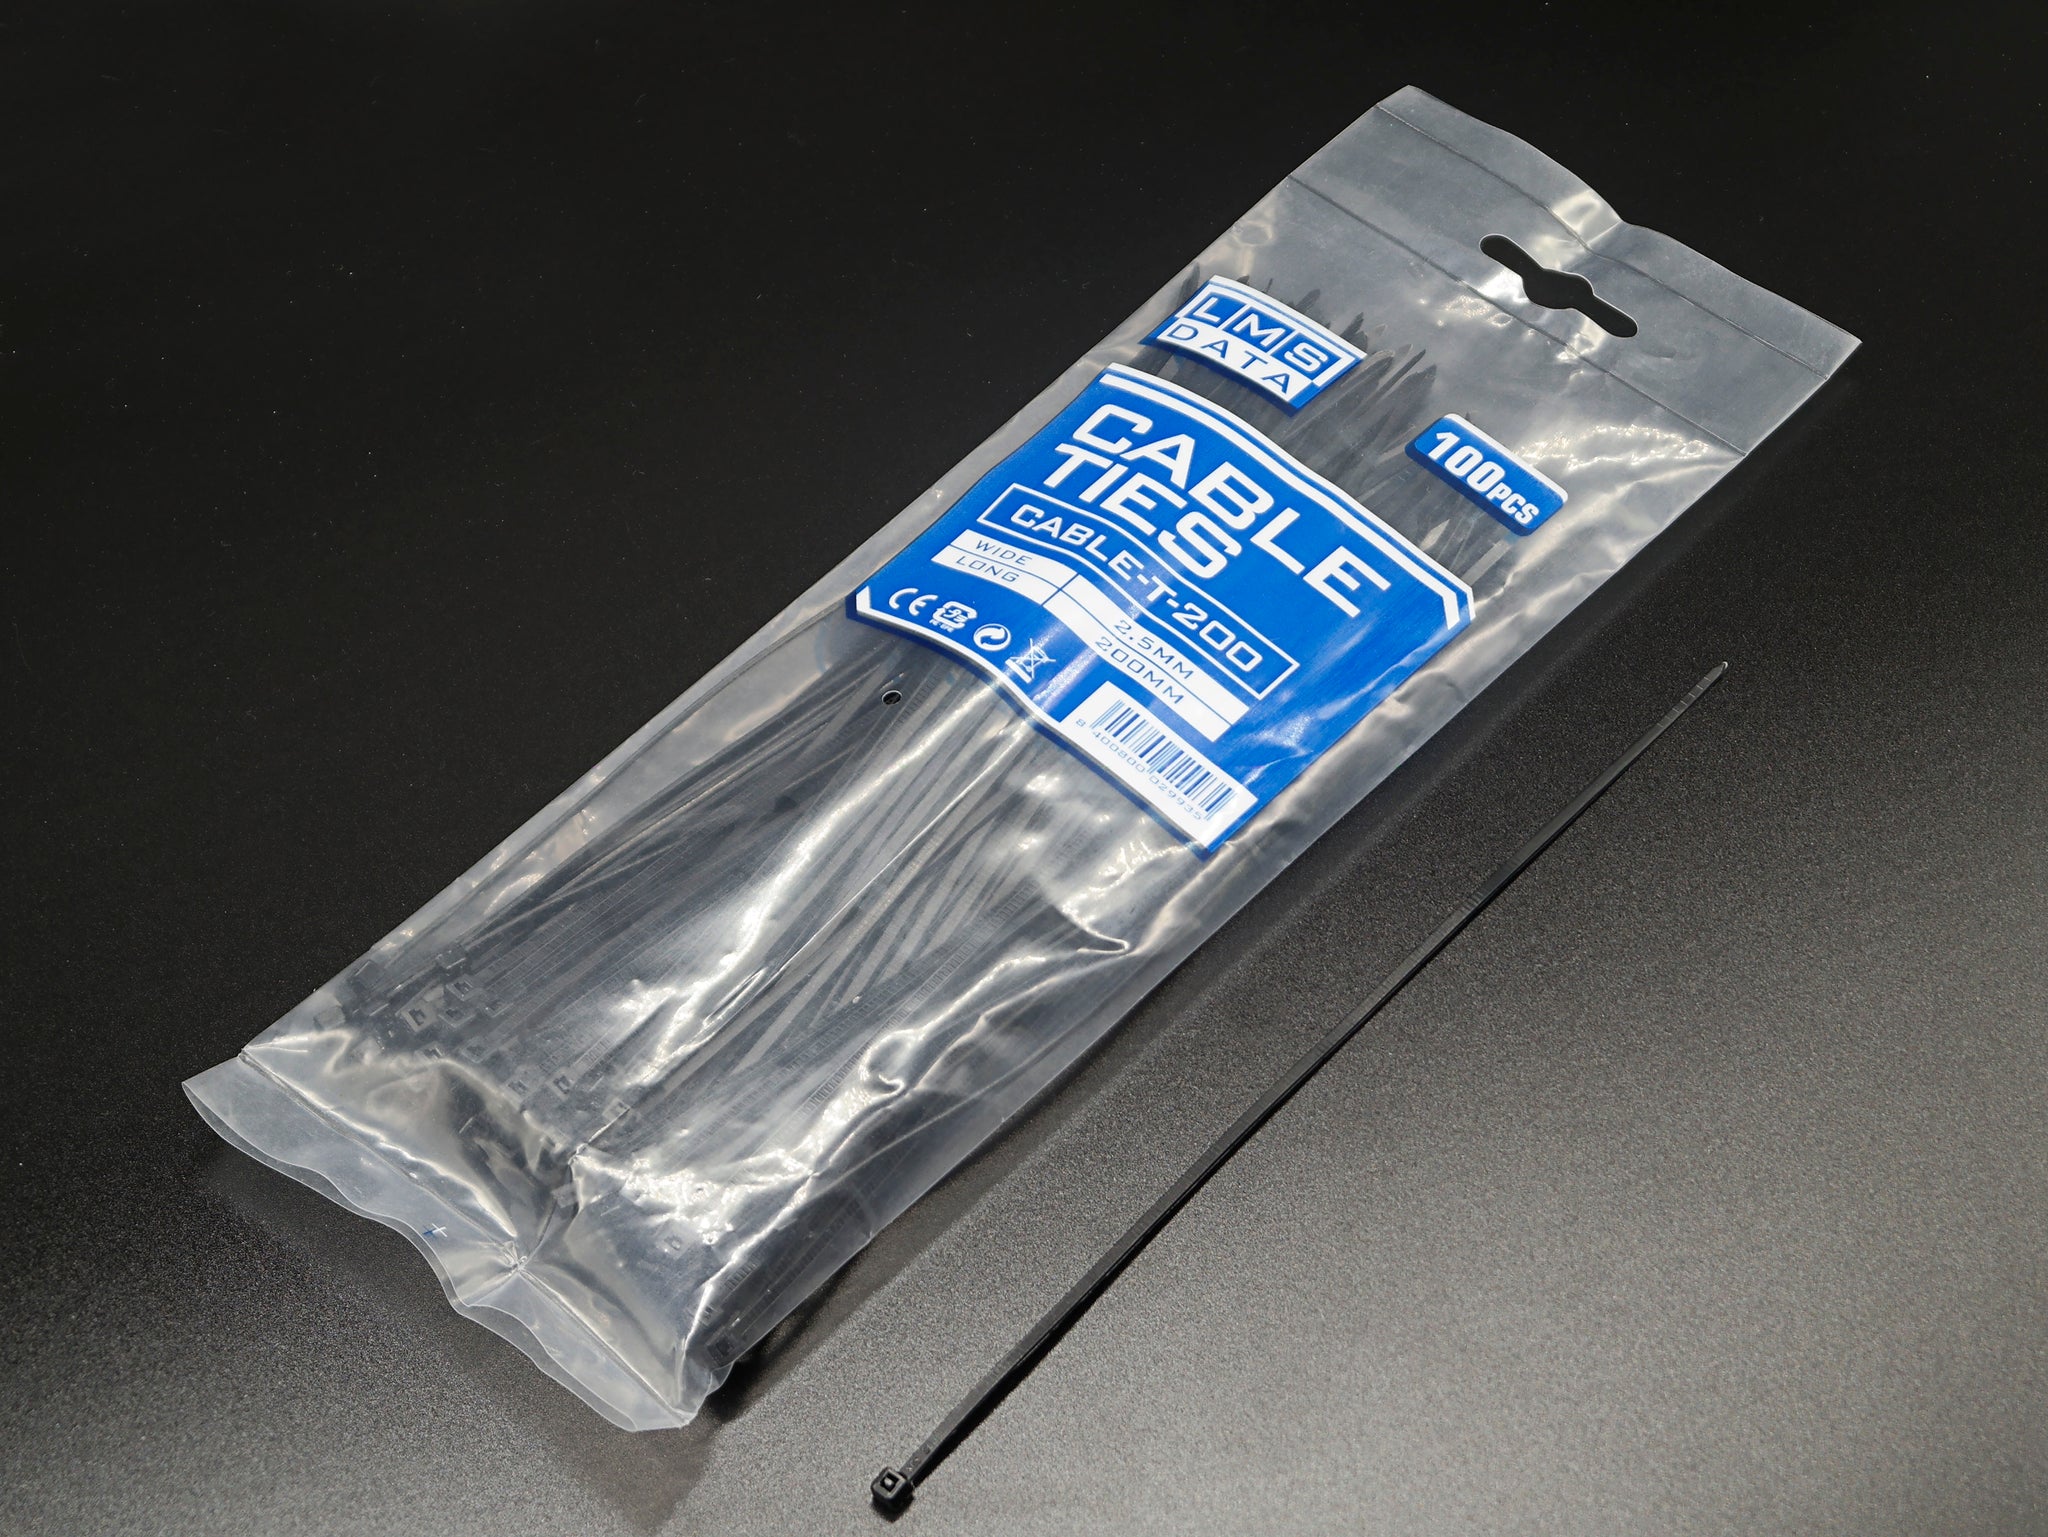 Black Cable Ties 2.5mm wide x 200mm long - Bag of 100 (CABLE-T-200B)